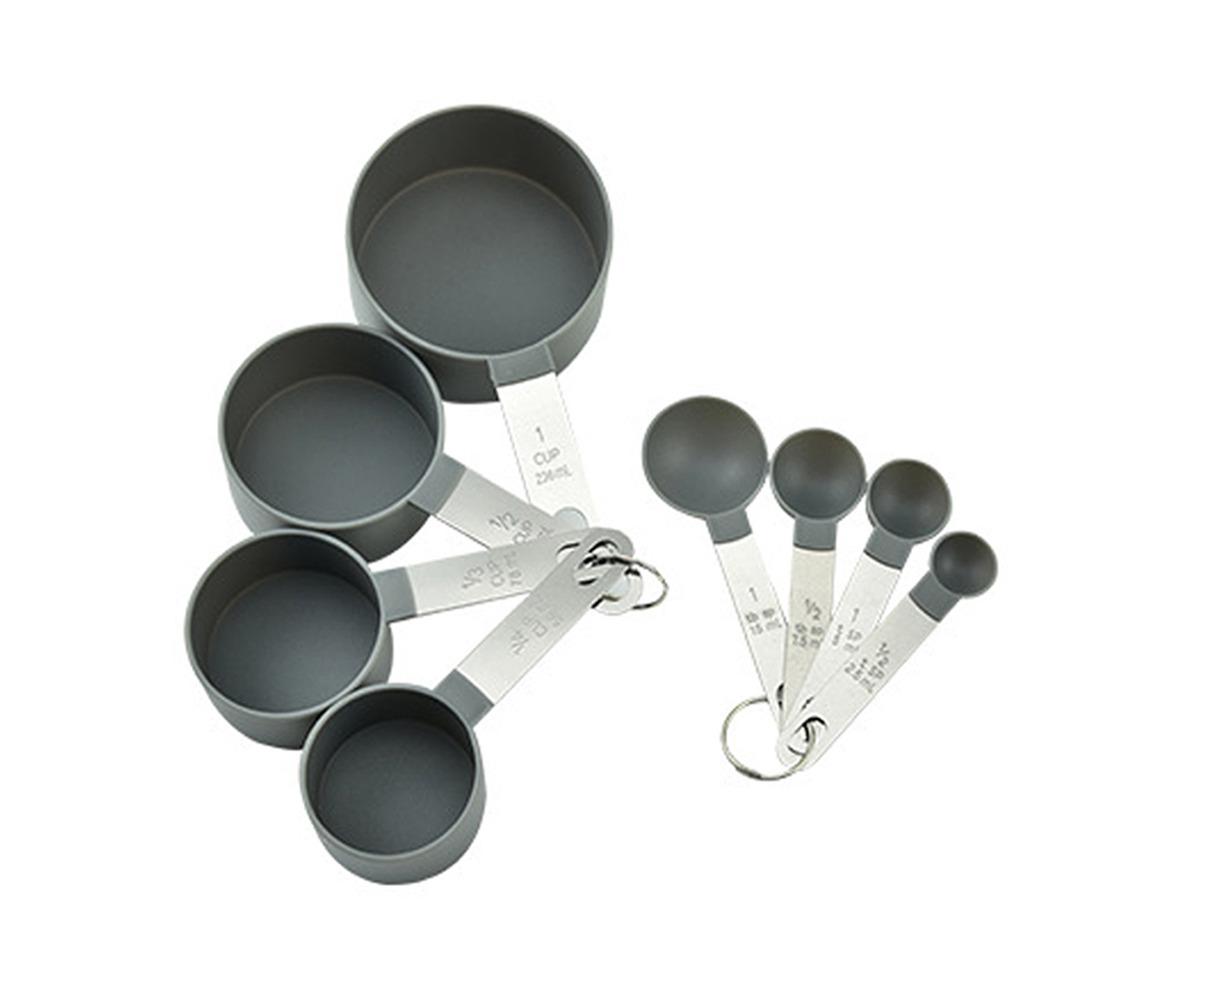 5 Nesting Cups and 8 Stackable Spoons Stainless Steel Measuring Cups and Spoons Set of 13 Pieces steel 